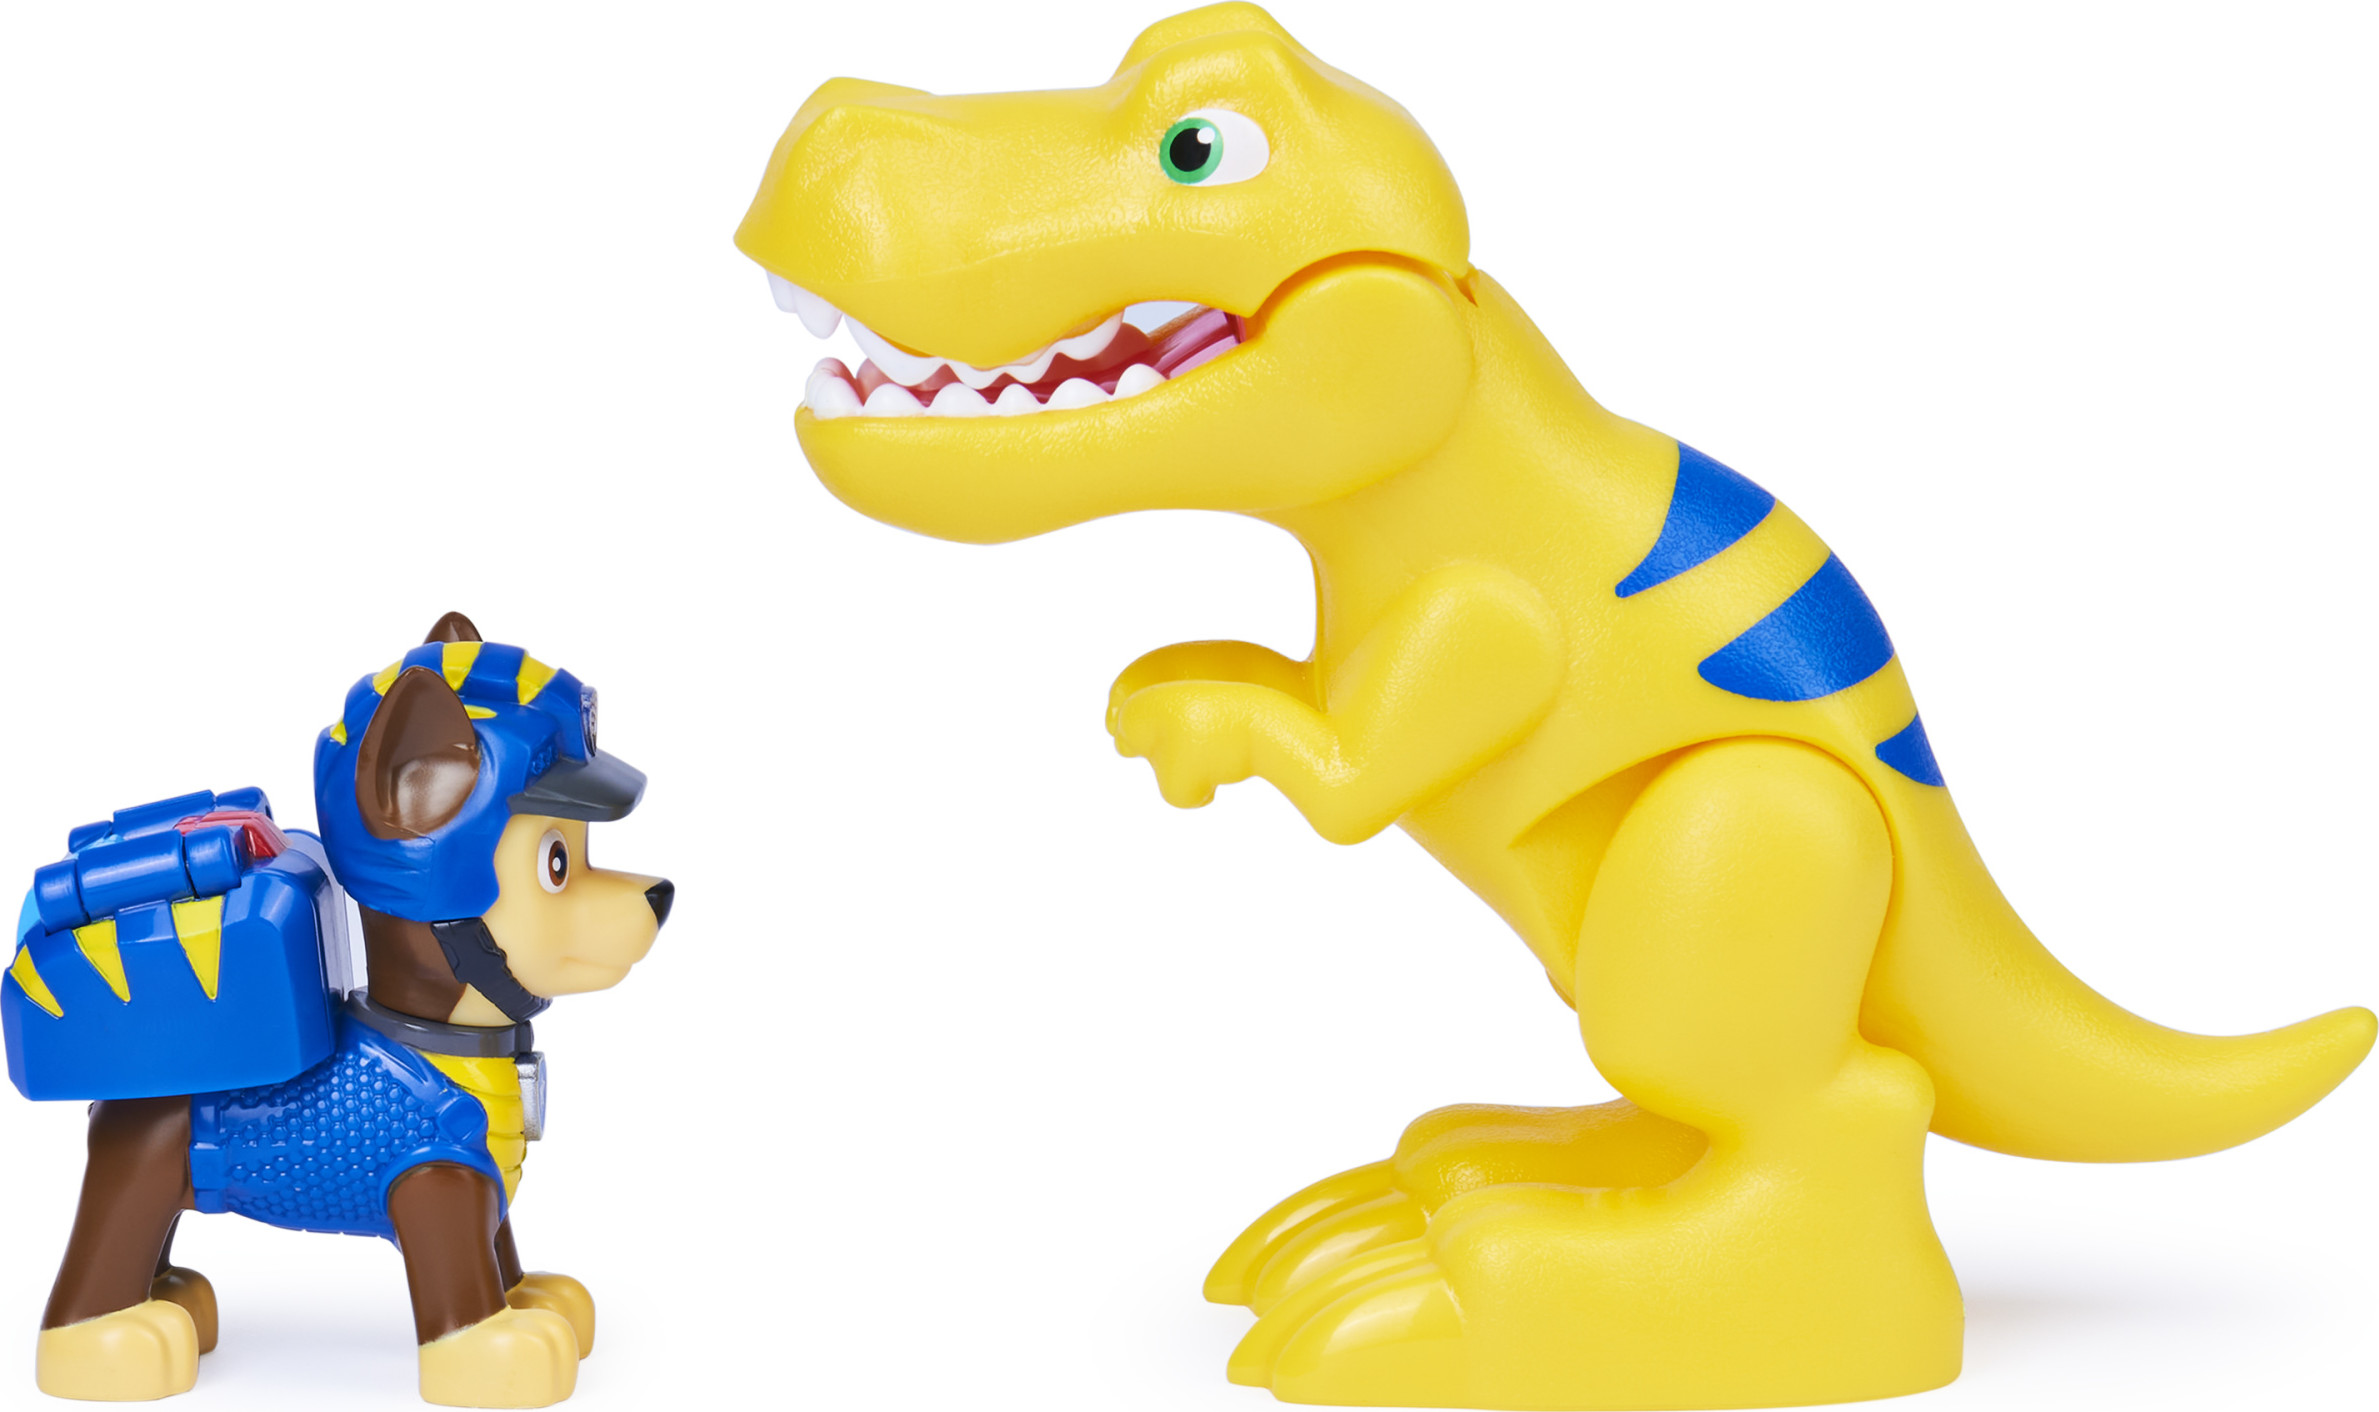 PAW Patrol, Dino Rescue Chase and Dinosaur Action Figure Set, for Kids Aged 3 and up - image 4 of 5